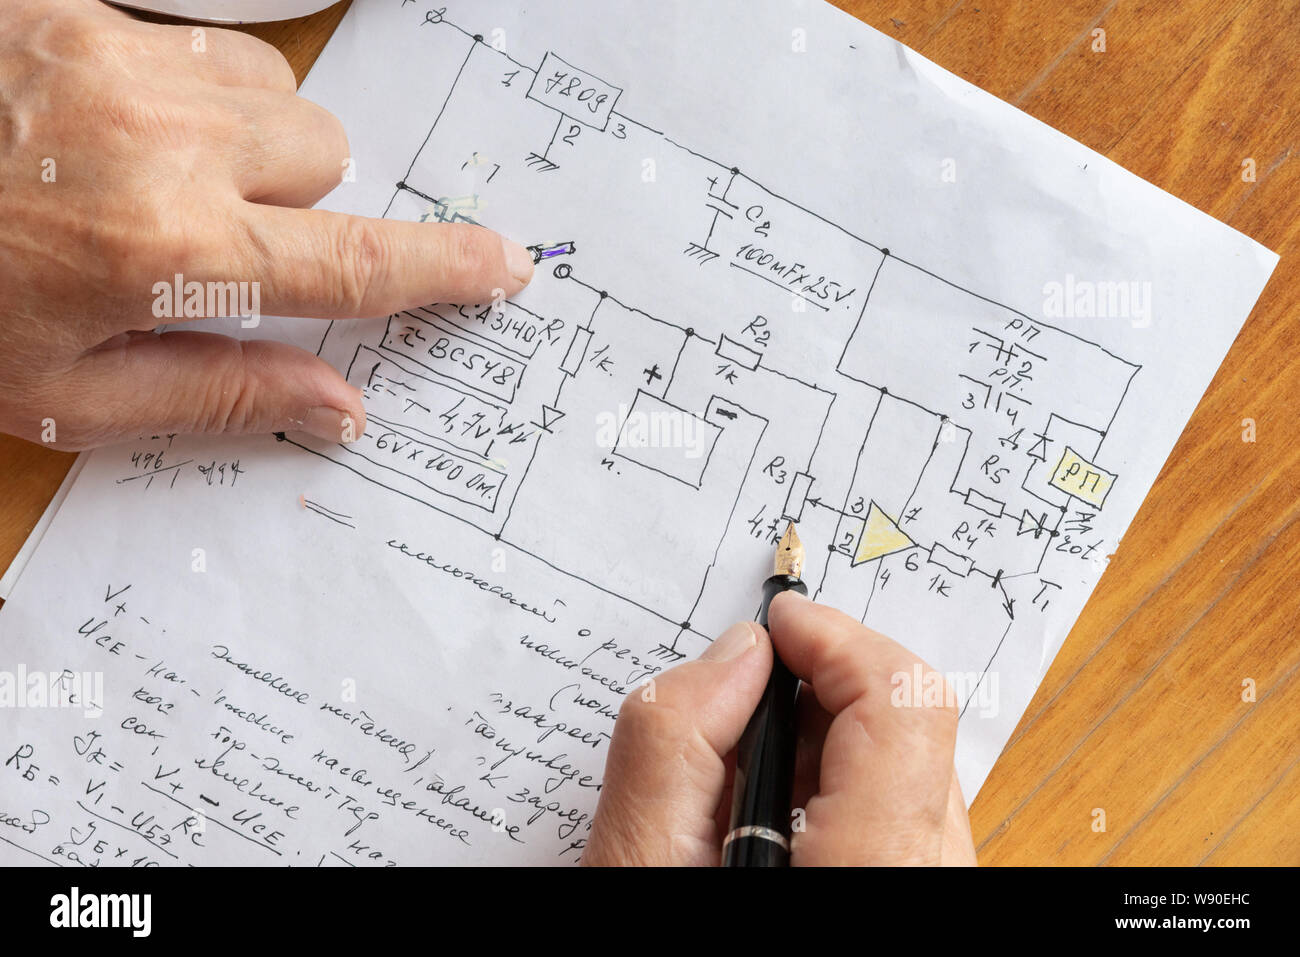 macro view of engineer planing the electrical circuit on paper Stock Photo